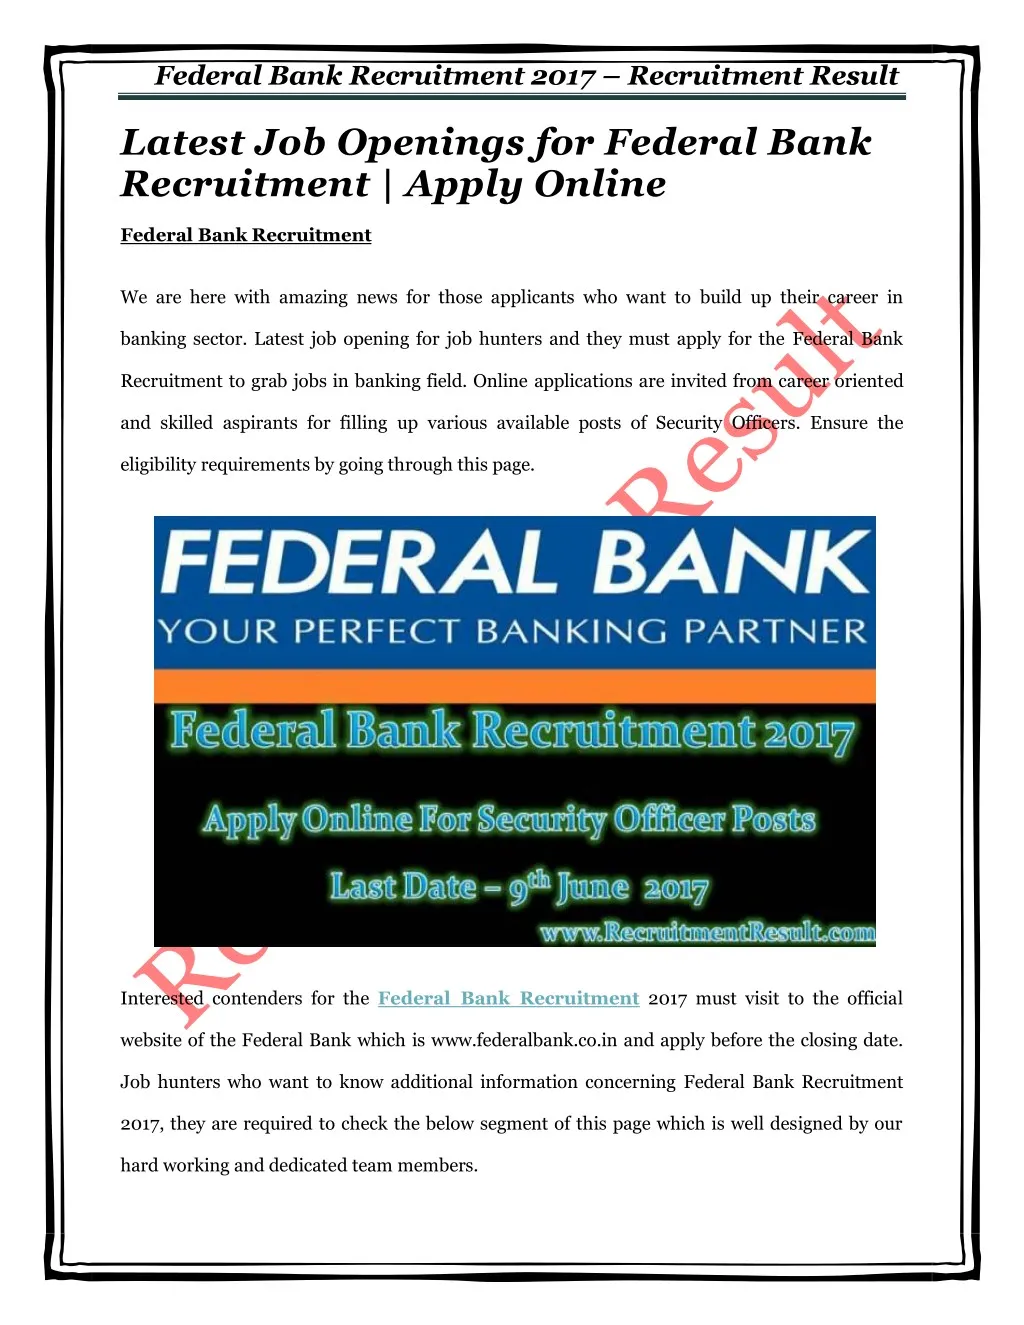 Government jobs vacancy in banks